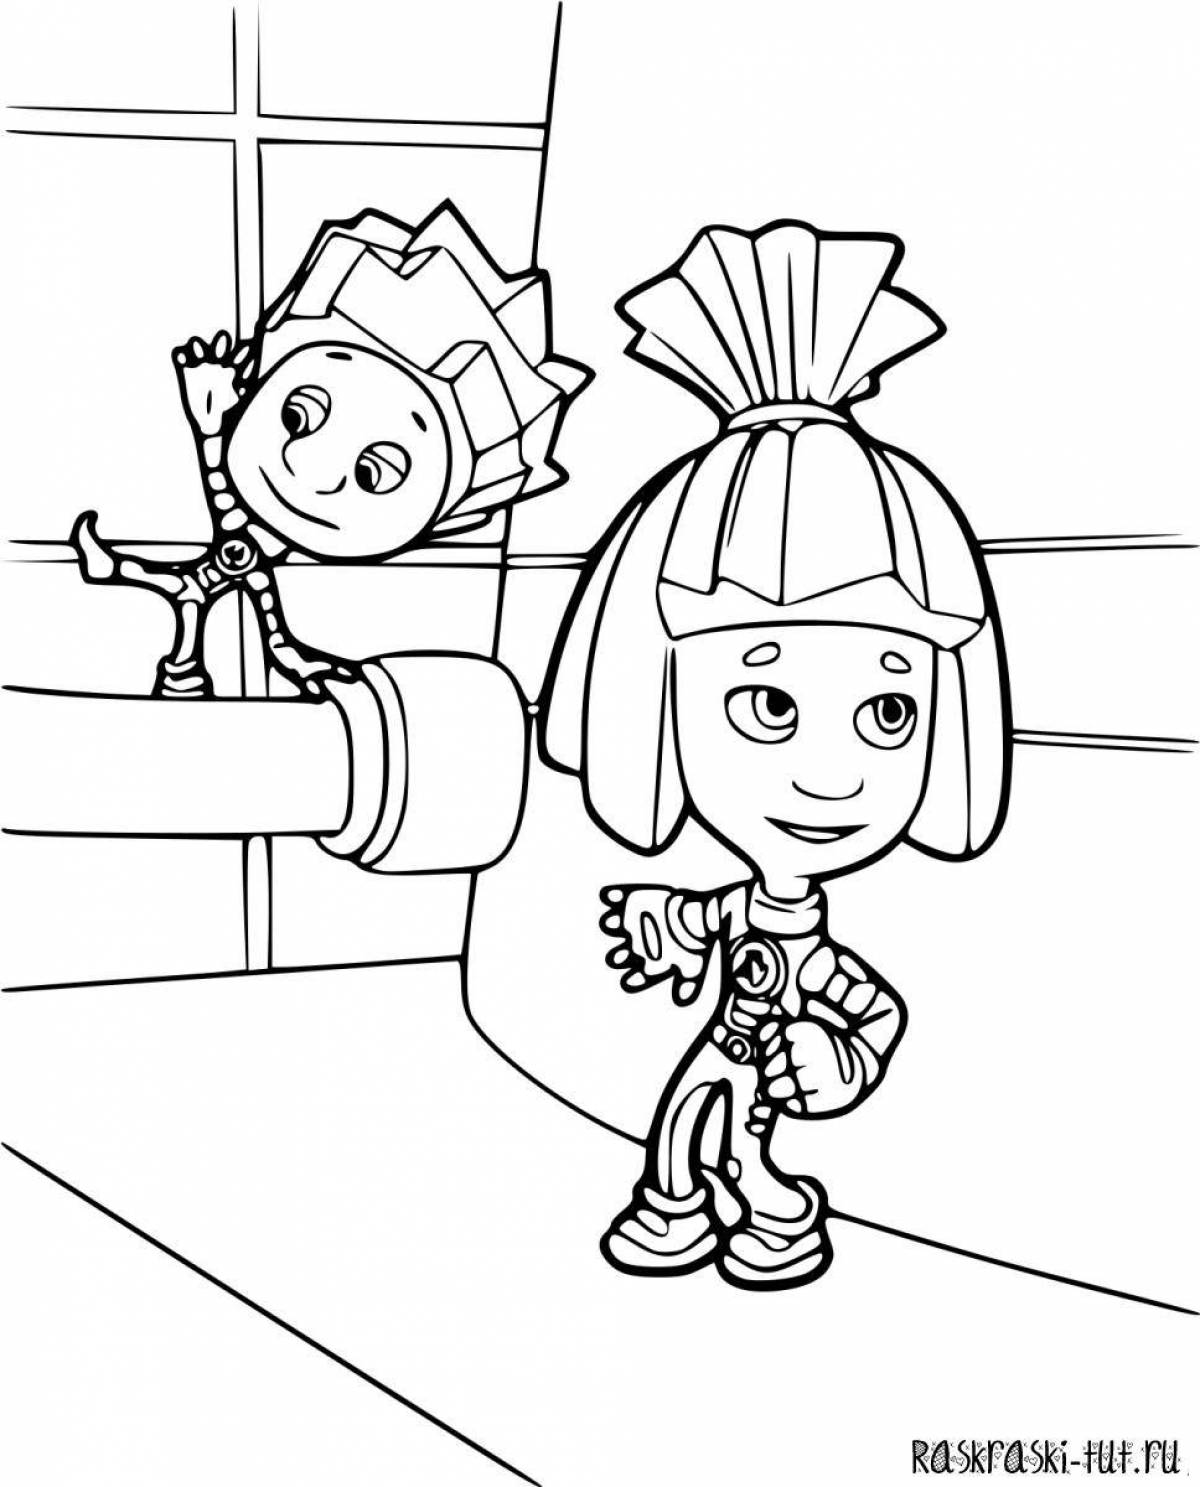 Playful coloring page zero